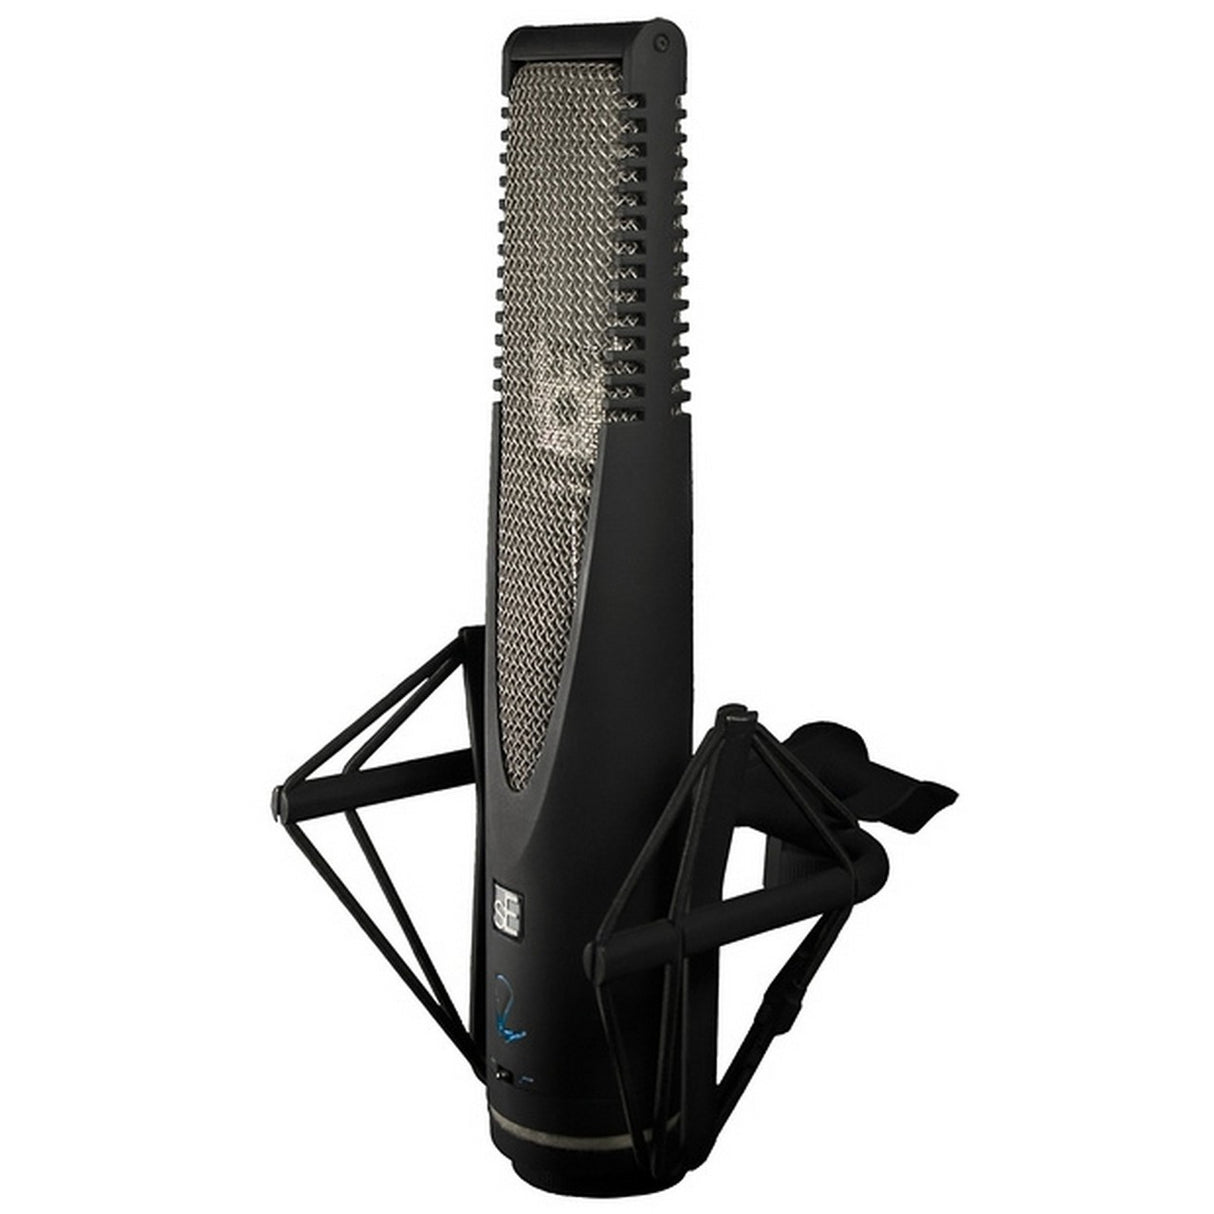 sE Electronics RNR1 | High Frequency Active Ribbon Microphone